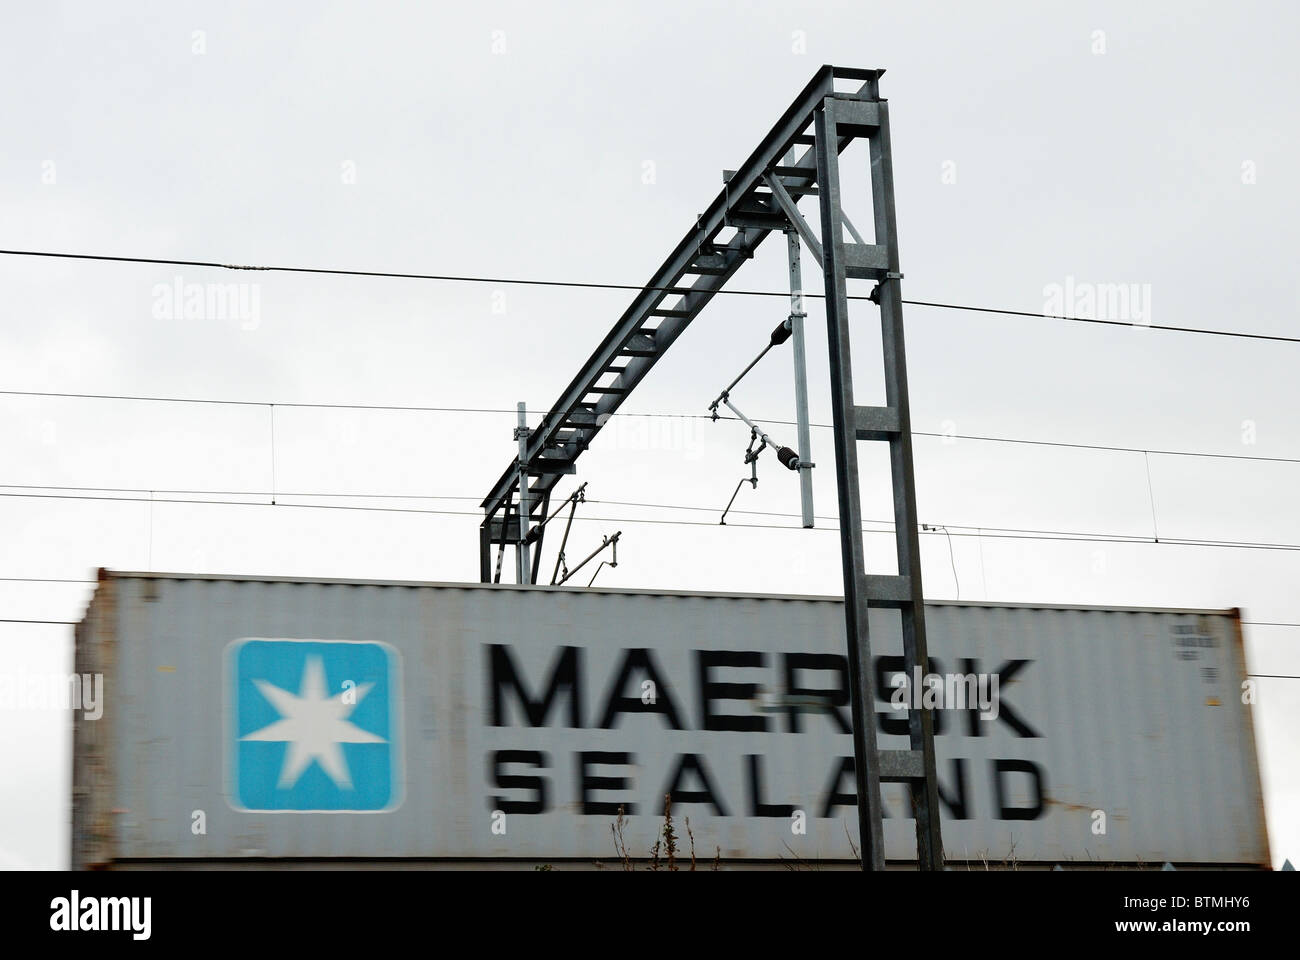 maersk sealand rail freight container england uk Stock Photo